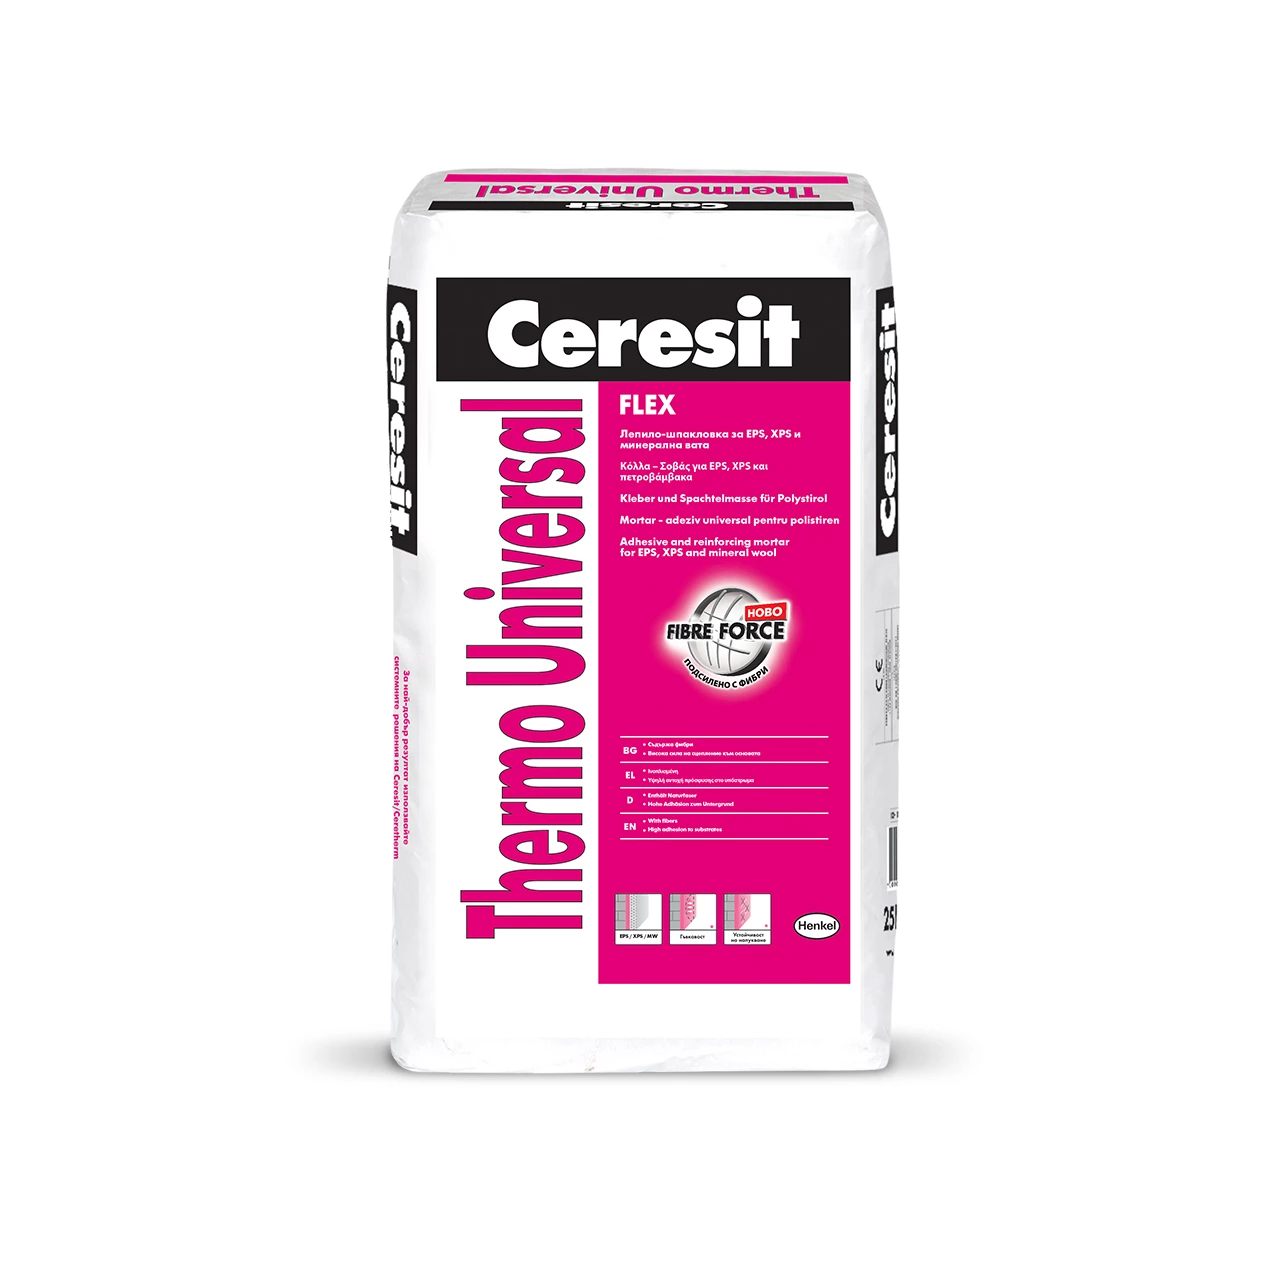 Ceresit Thermo Universal. Adhesive mortar for EPS/XPS/MW  25kg